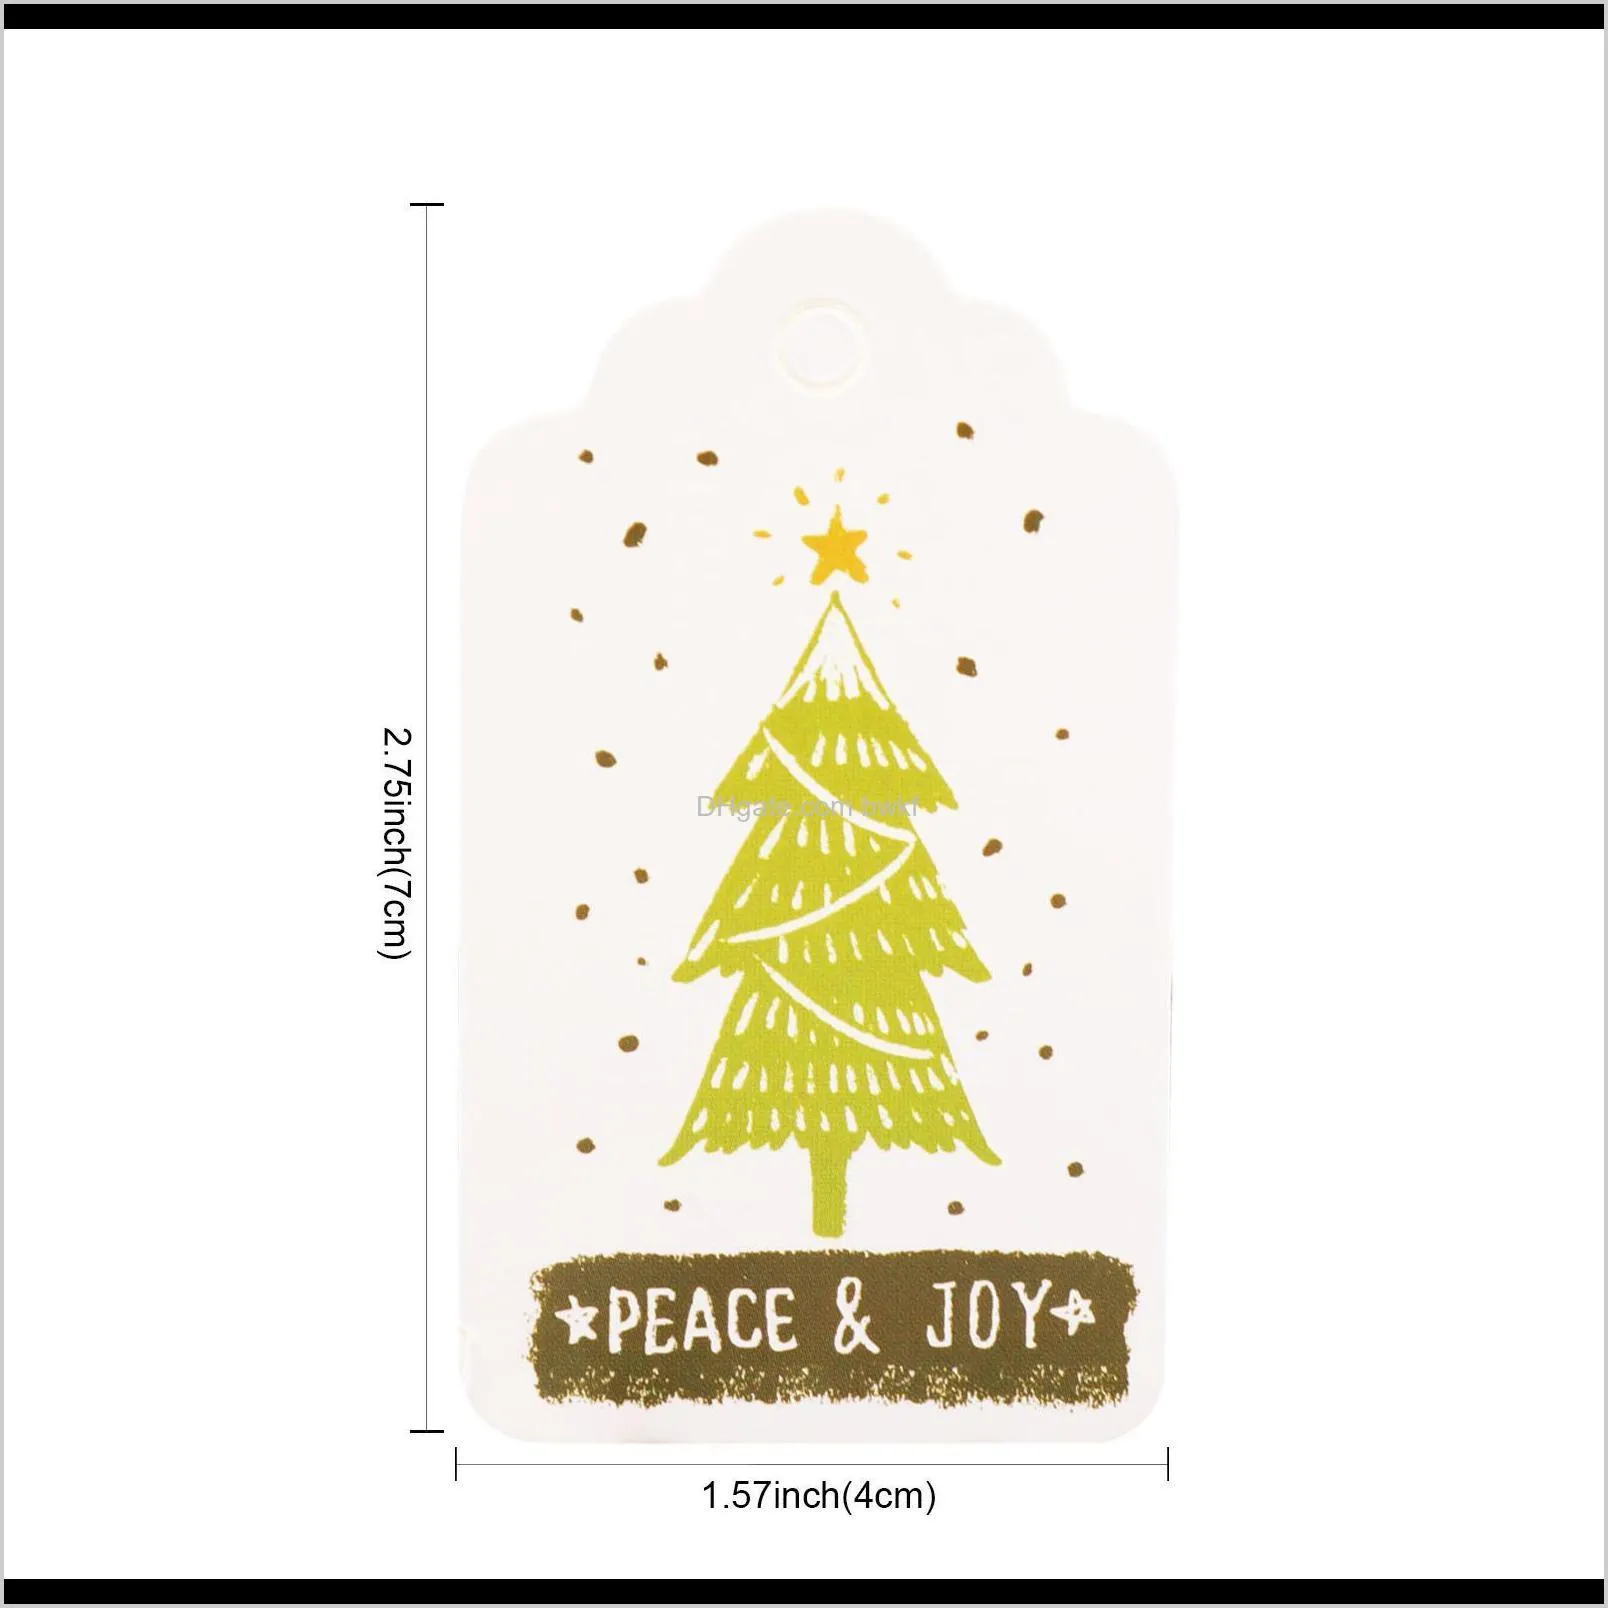 50pcs/lot merry christmas diy unique gift tags joy to world tag small card optional string diy craft label party decor